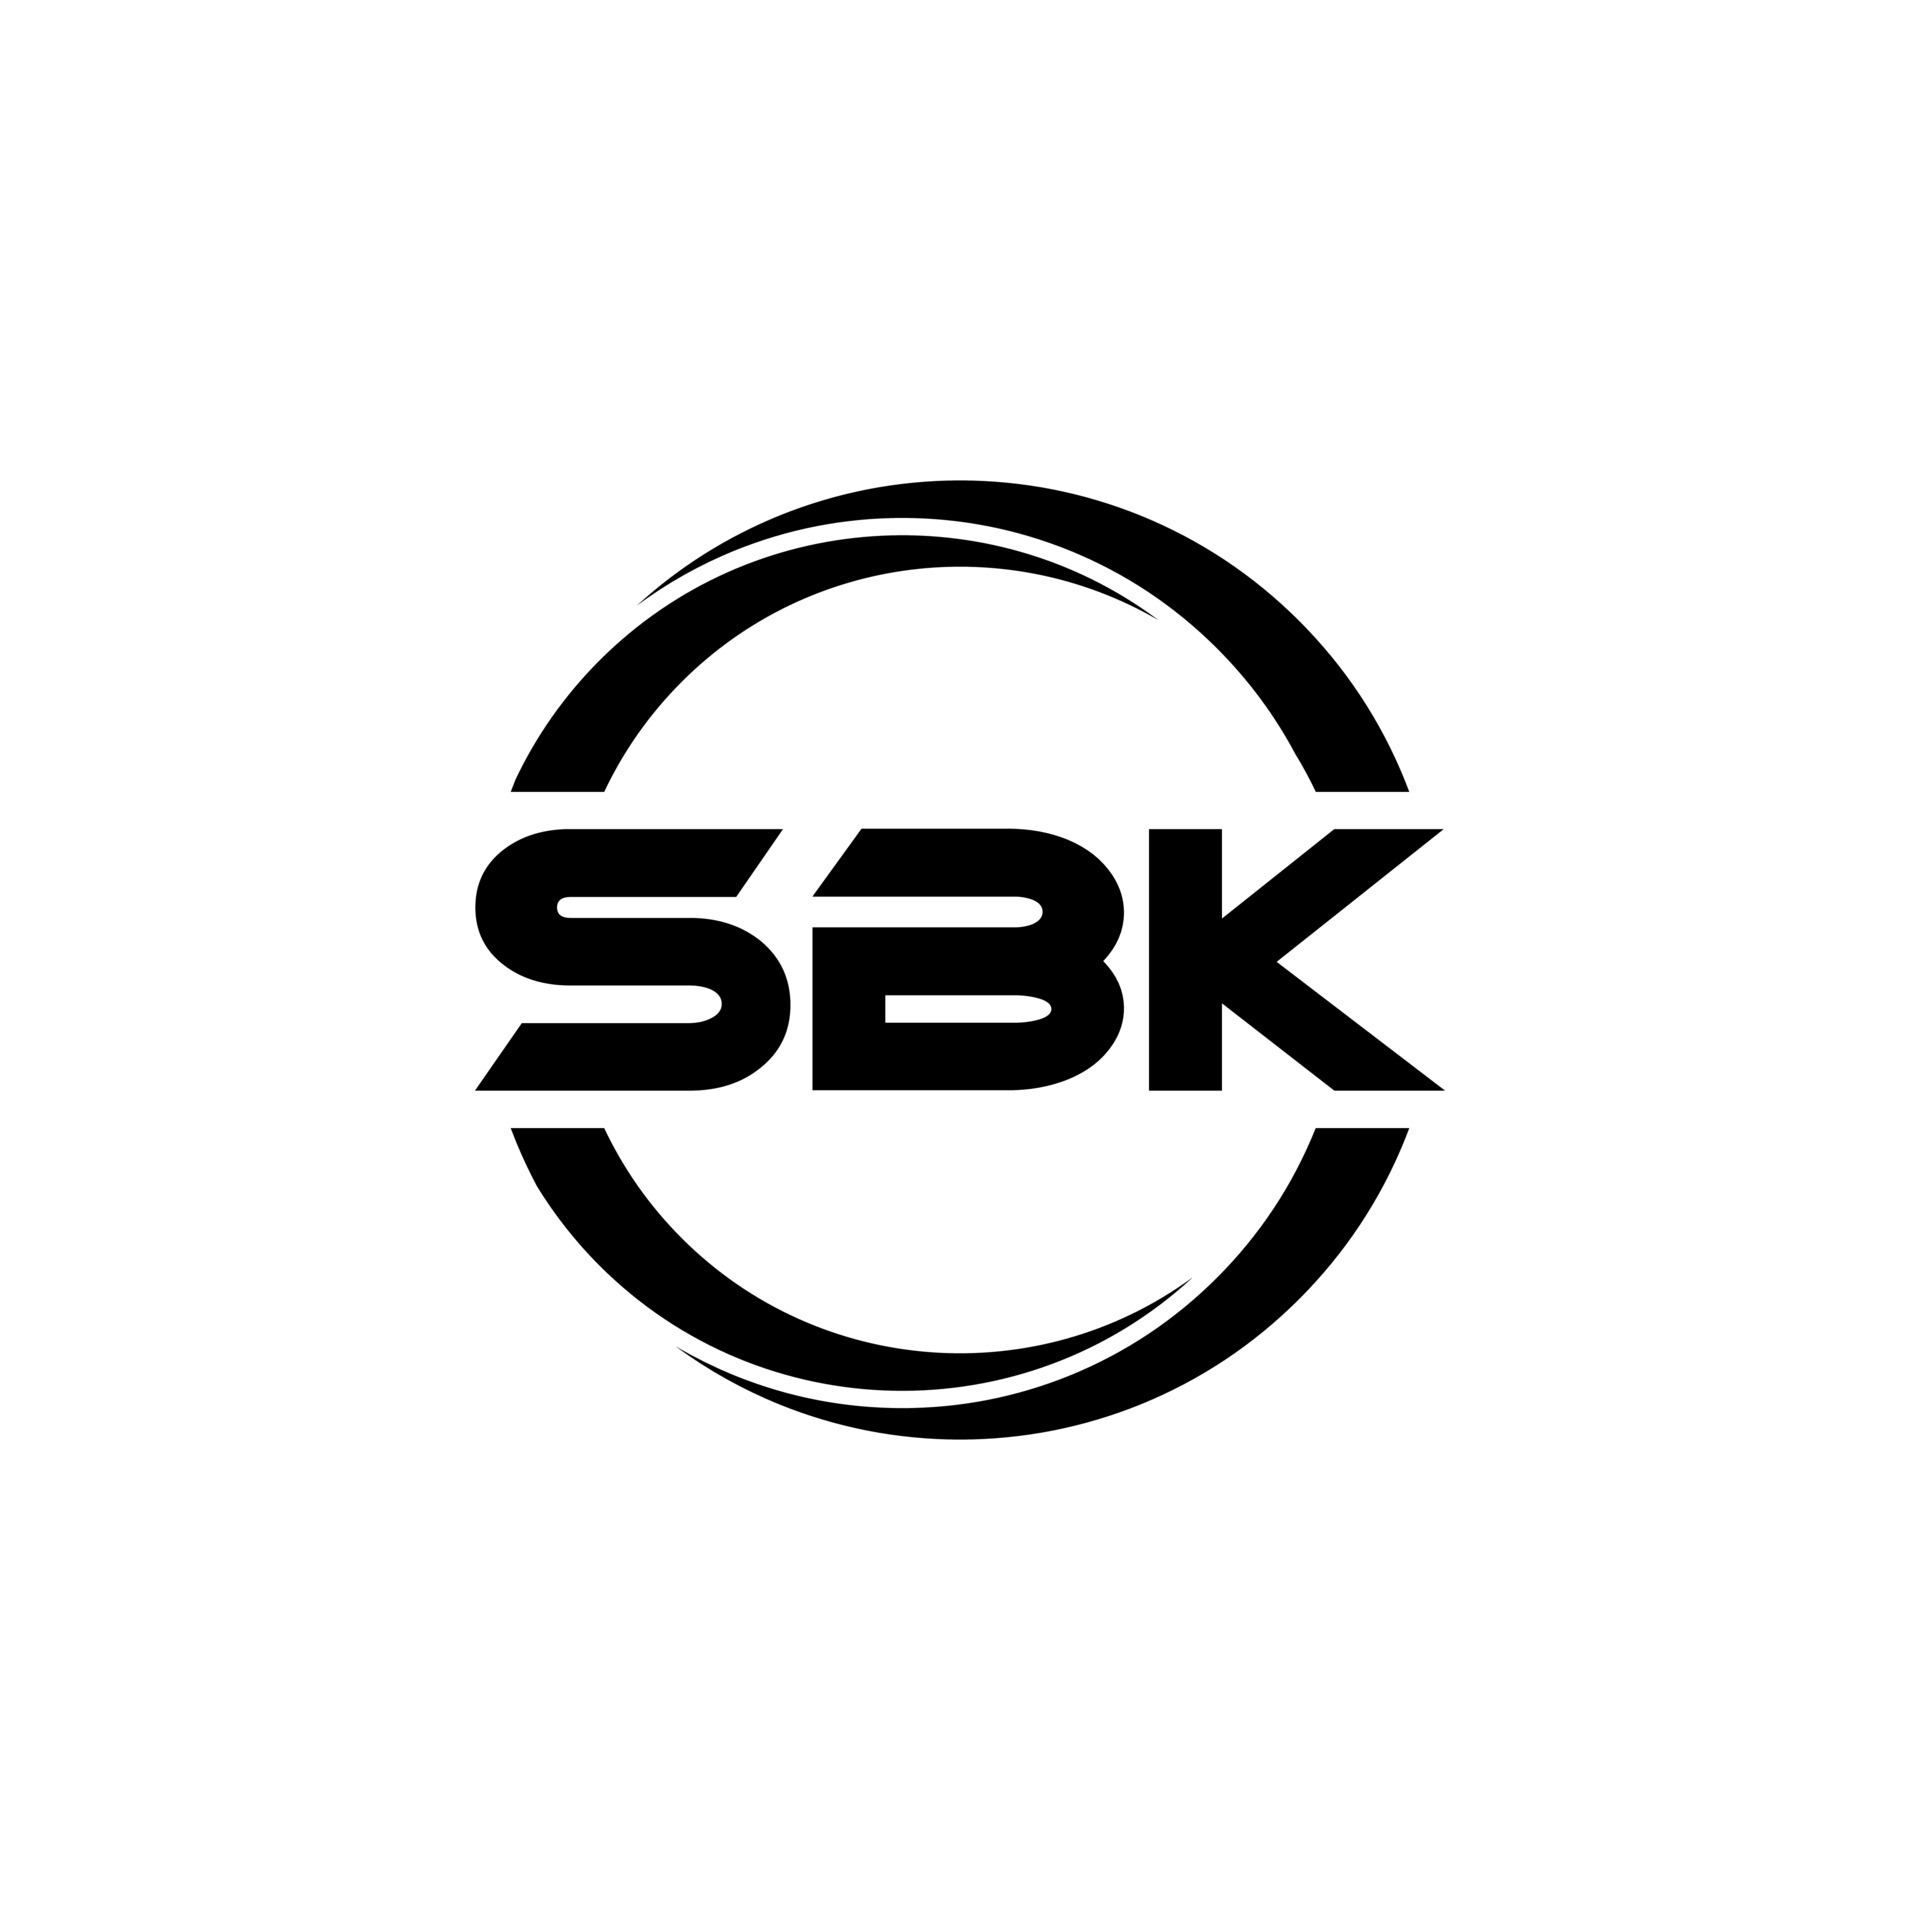 sbk logo page for assignment